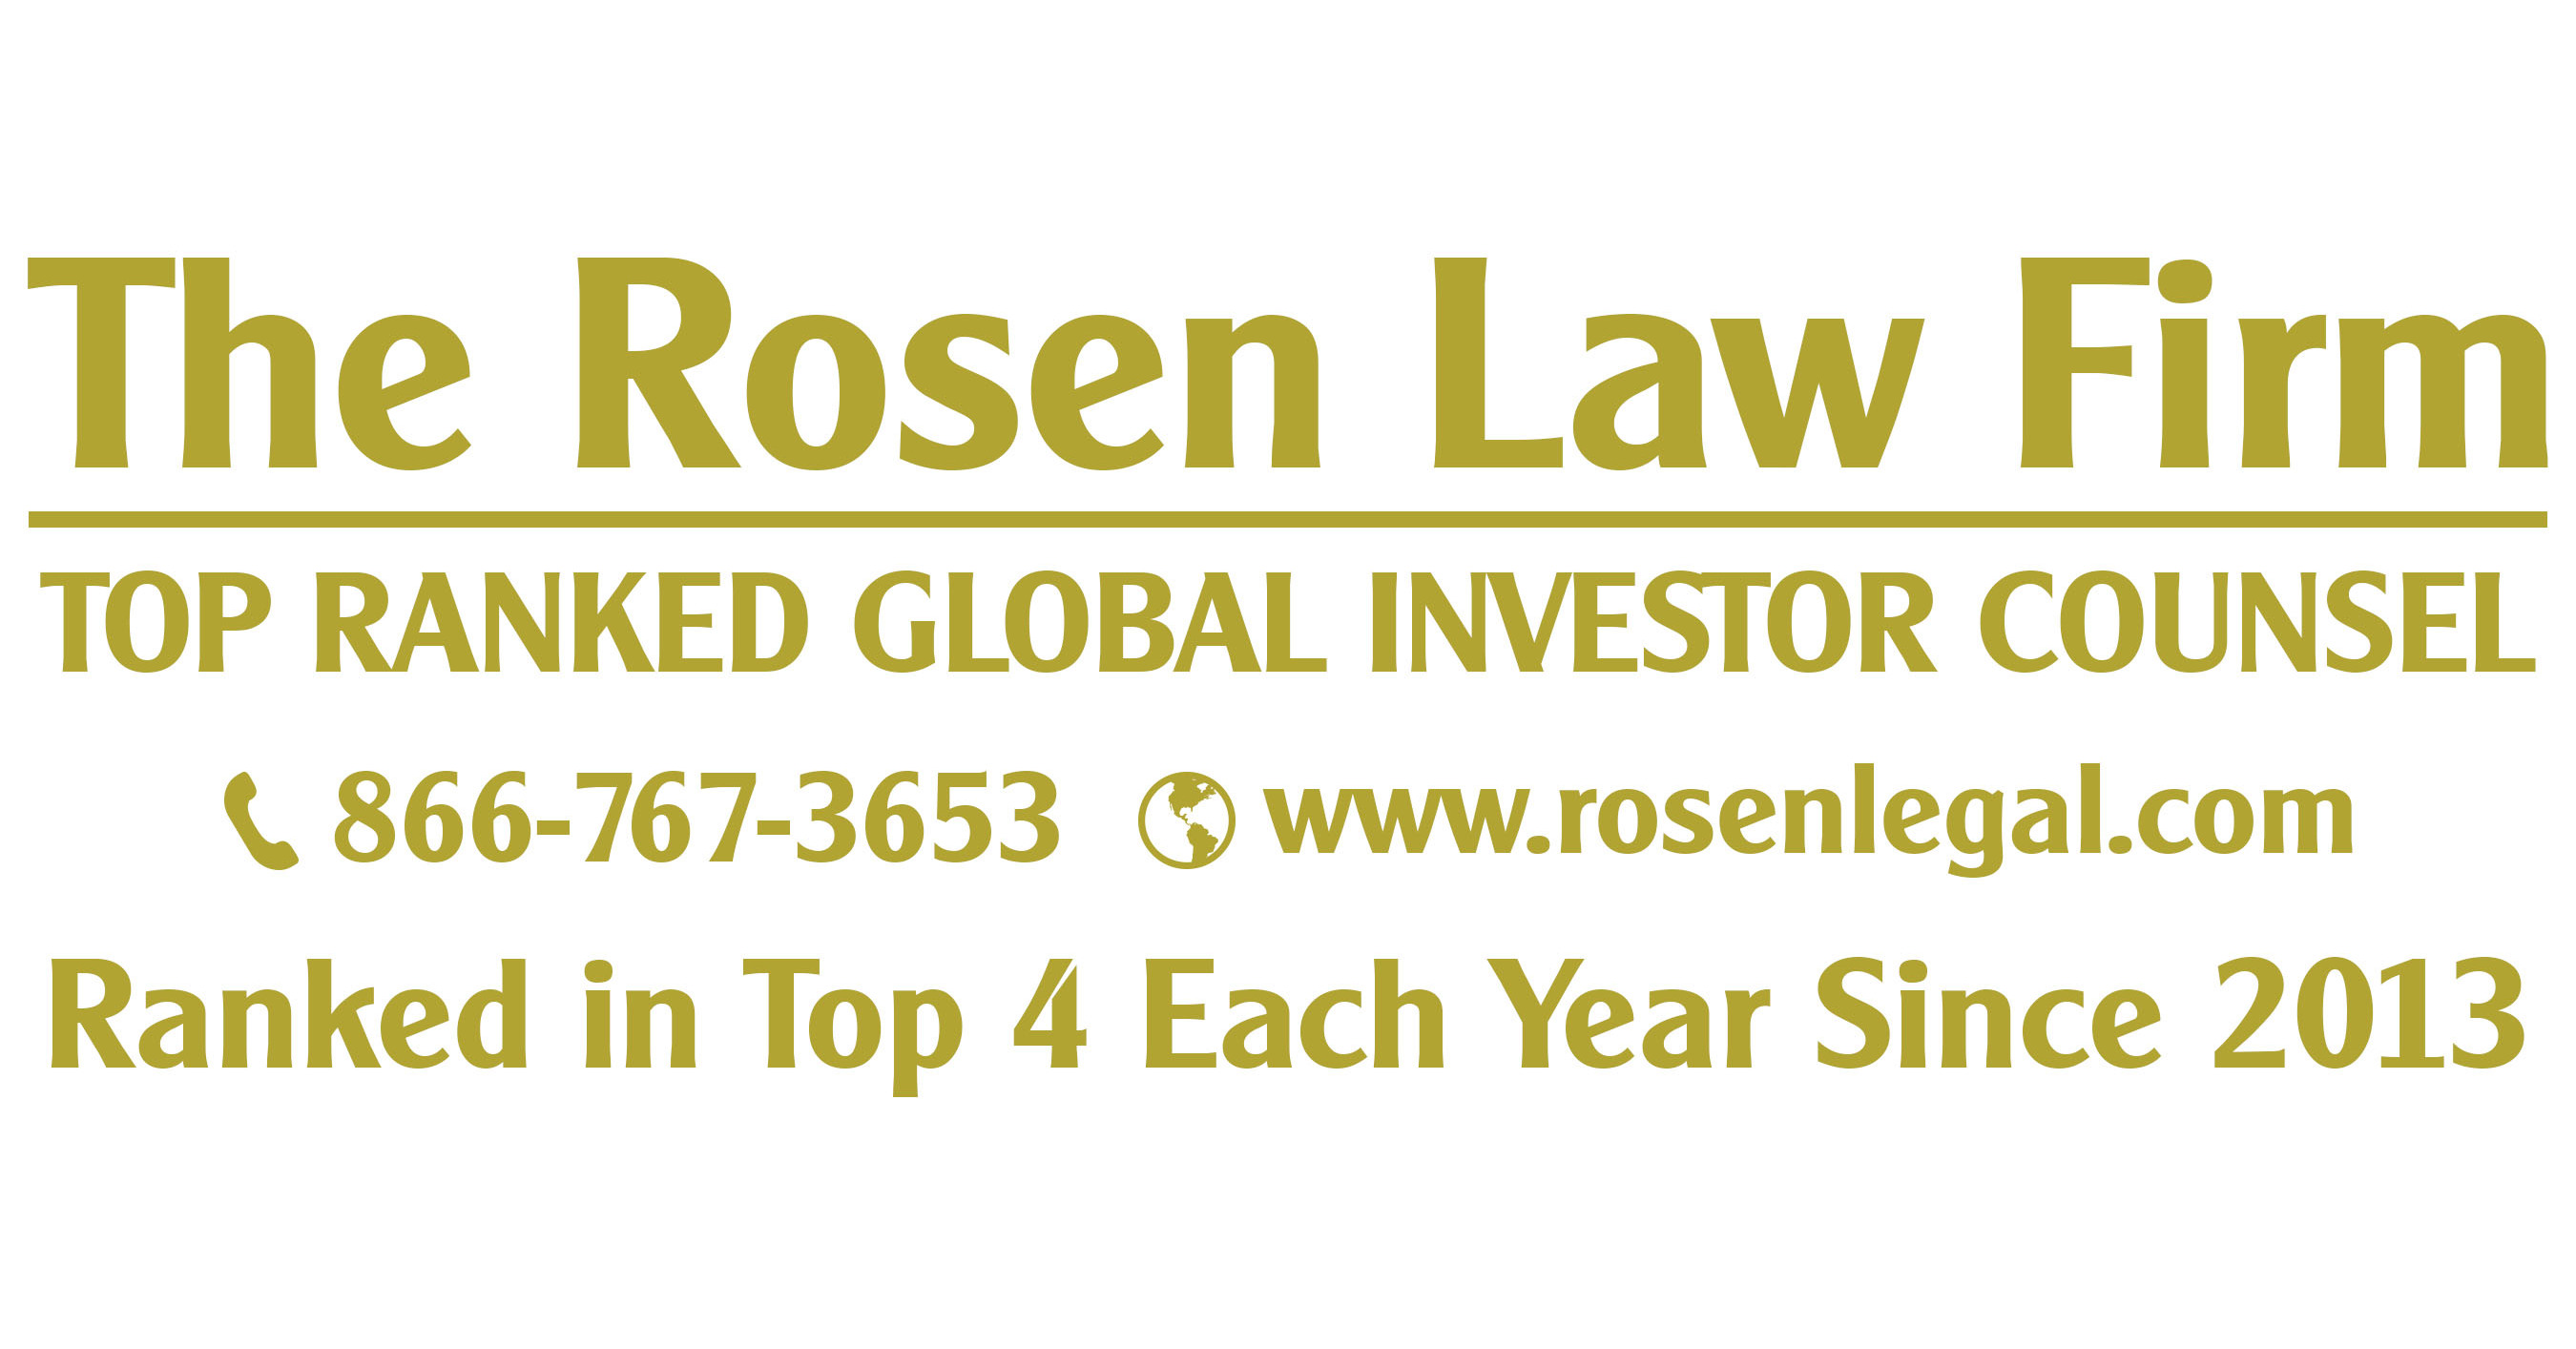 ROSEN, A TOP RANKED LAW FIRM, Continues Investigation of Securities Claims Against Lendlease Corporation Limited